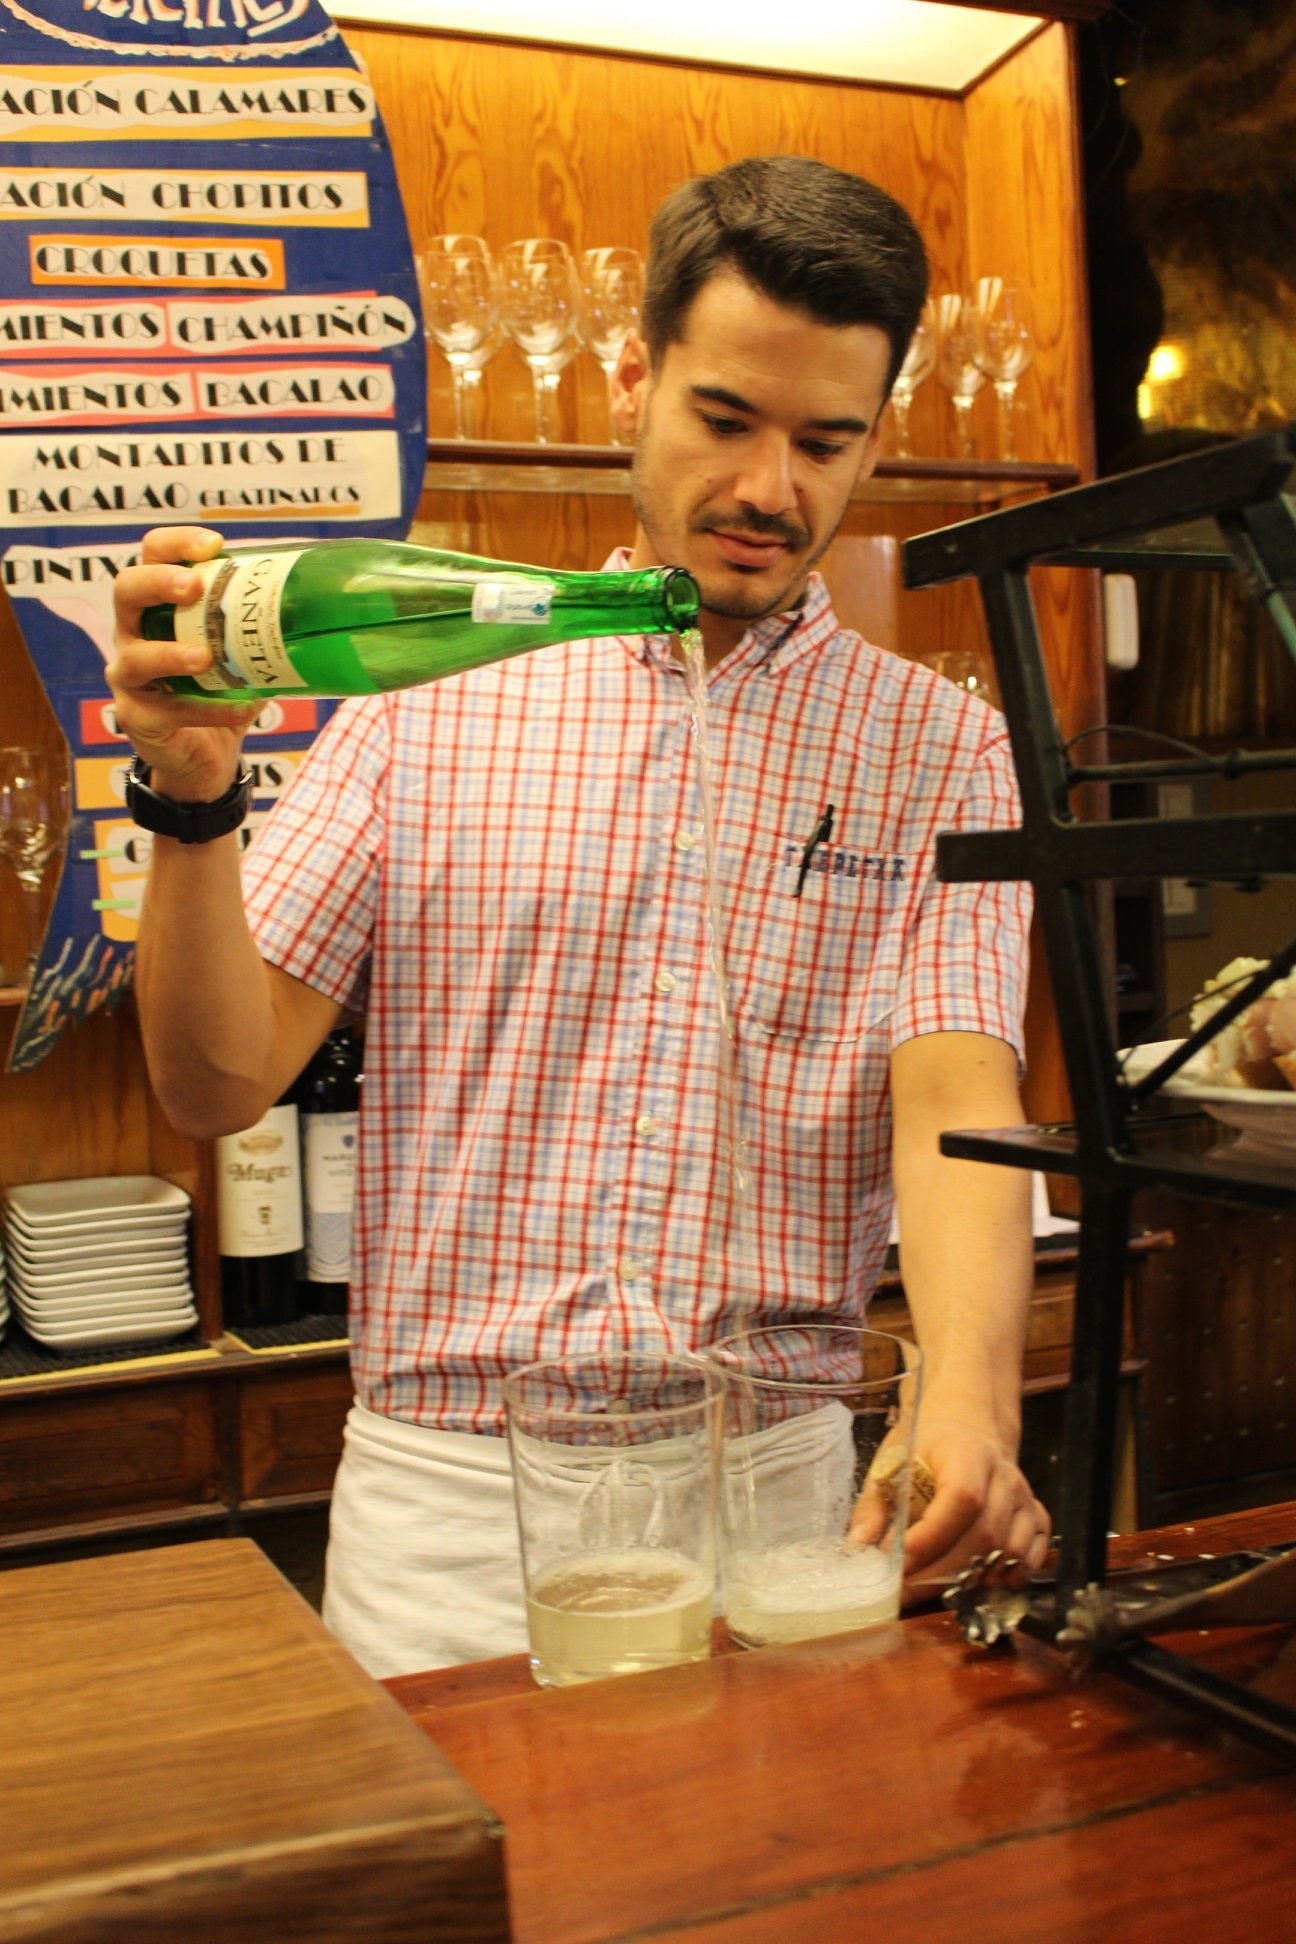 A man pouring glasses of white wine